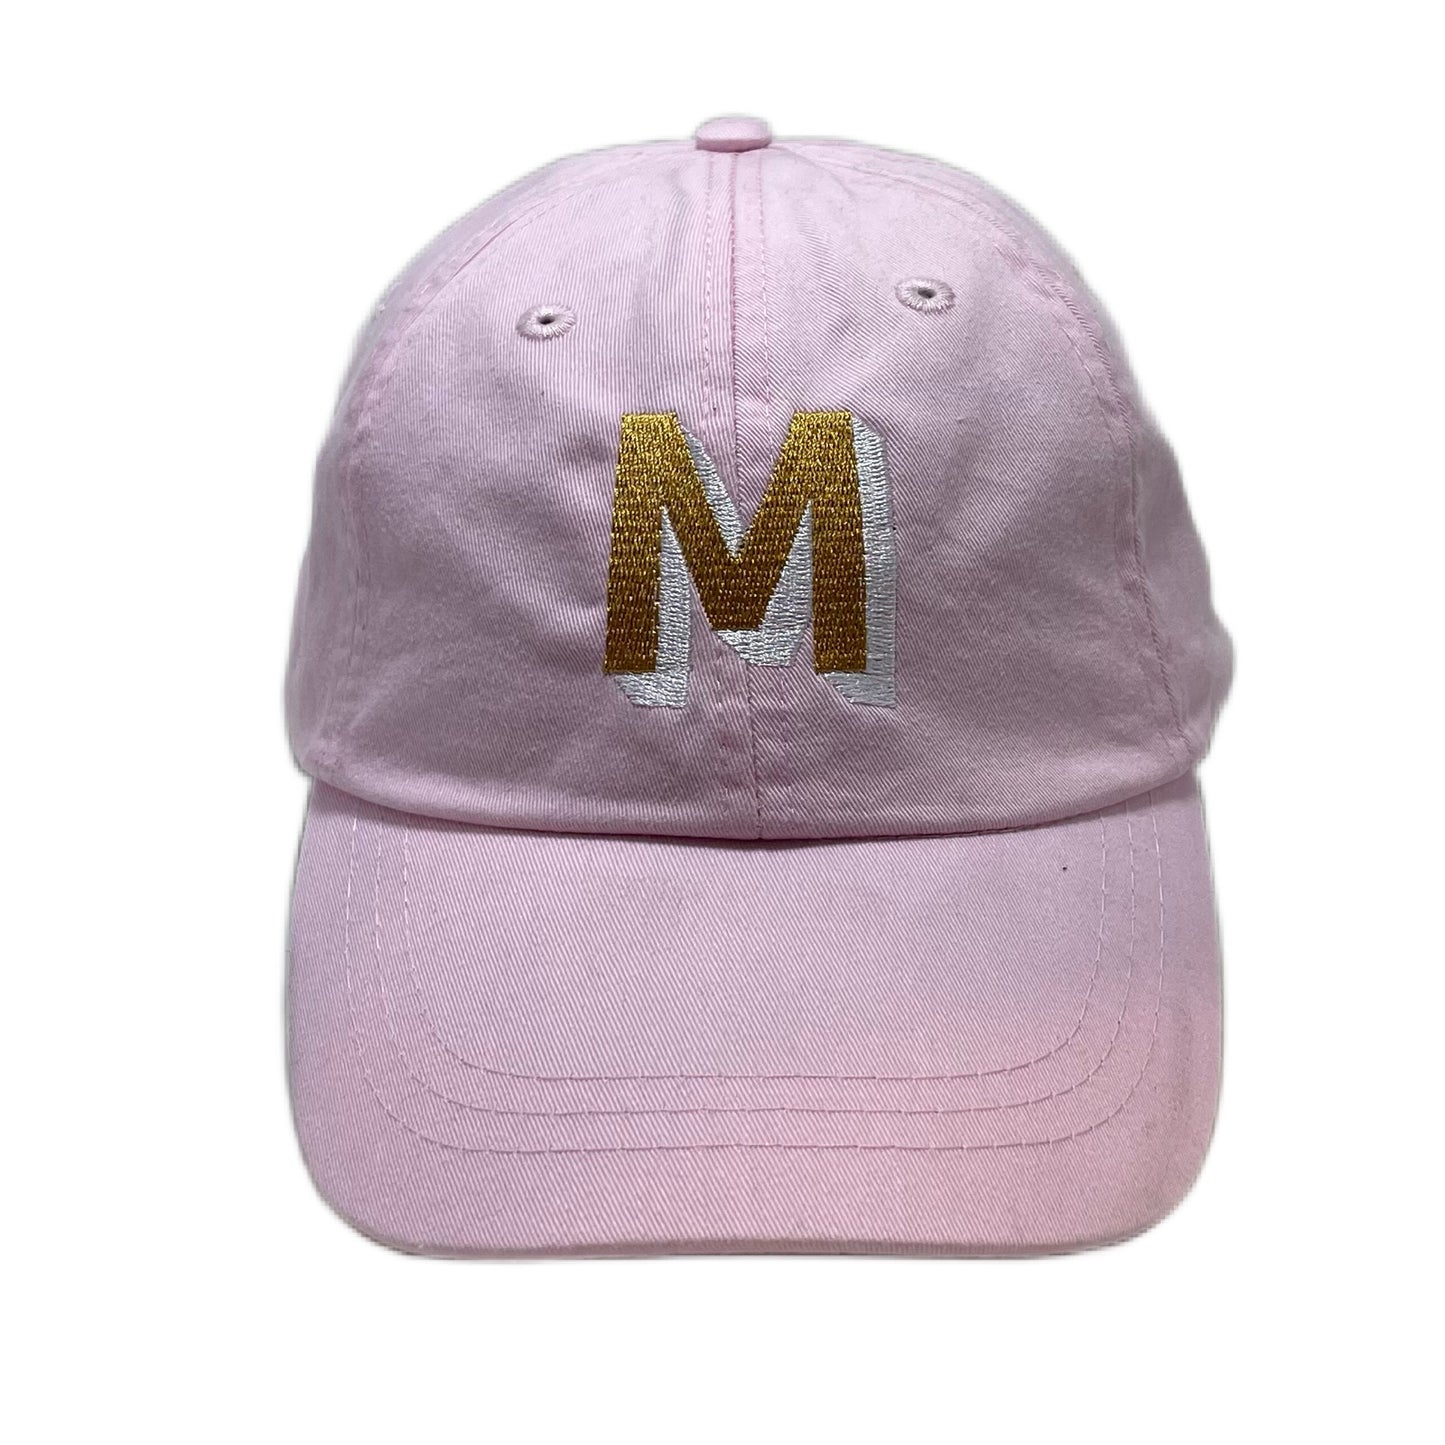 Customizable Gray Dad Hat with Olive & Cream Lettering